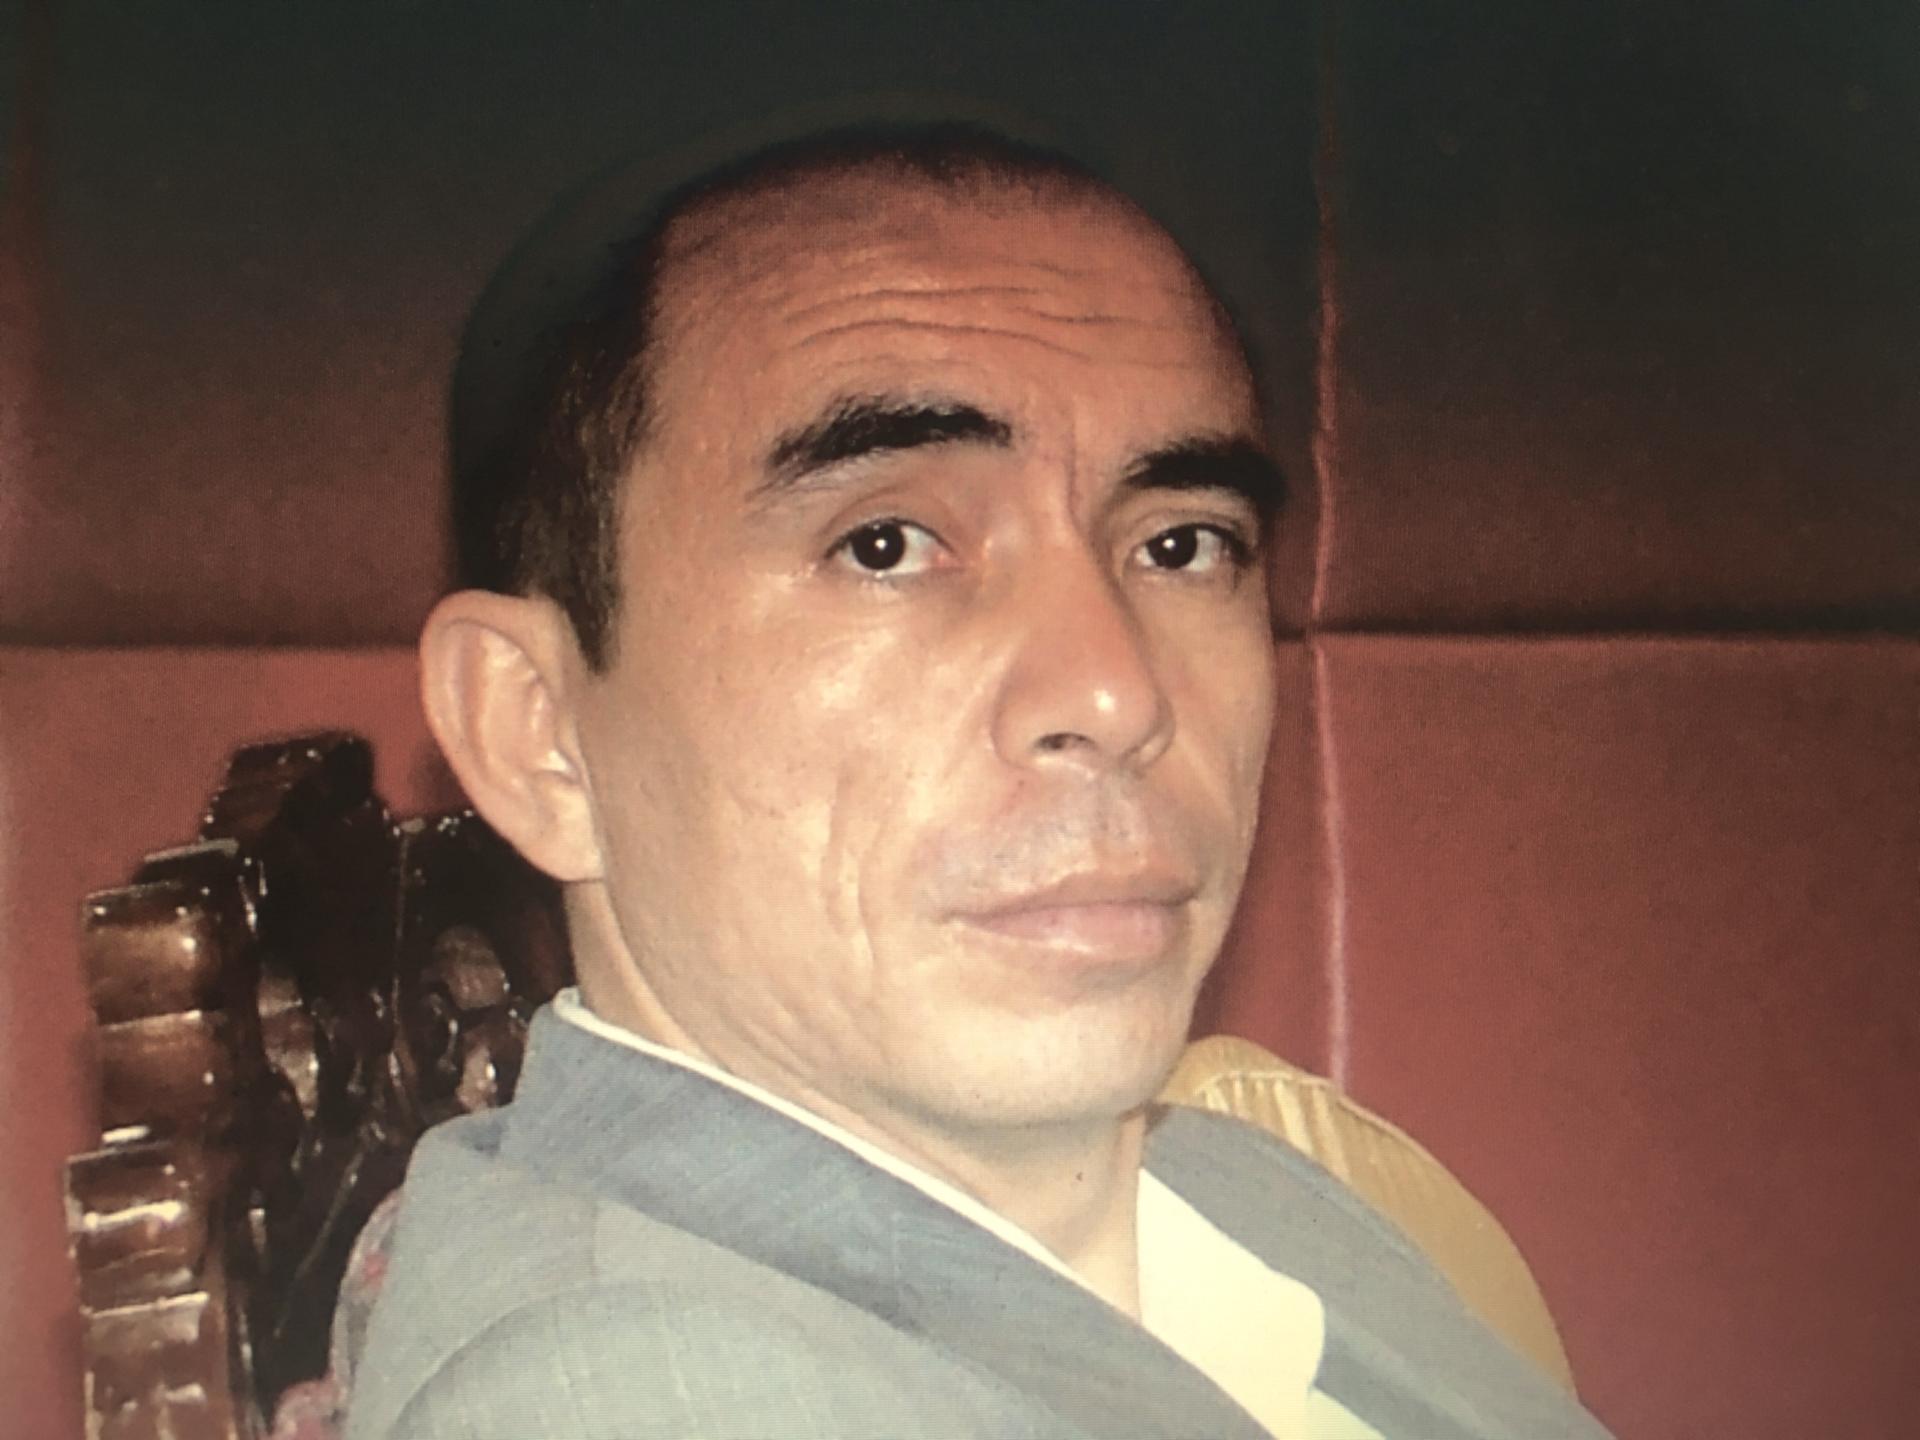 A photo of disappeared Uyghur writer Perhat Tursan in the early 2000s